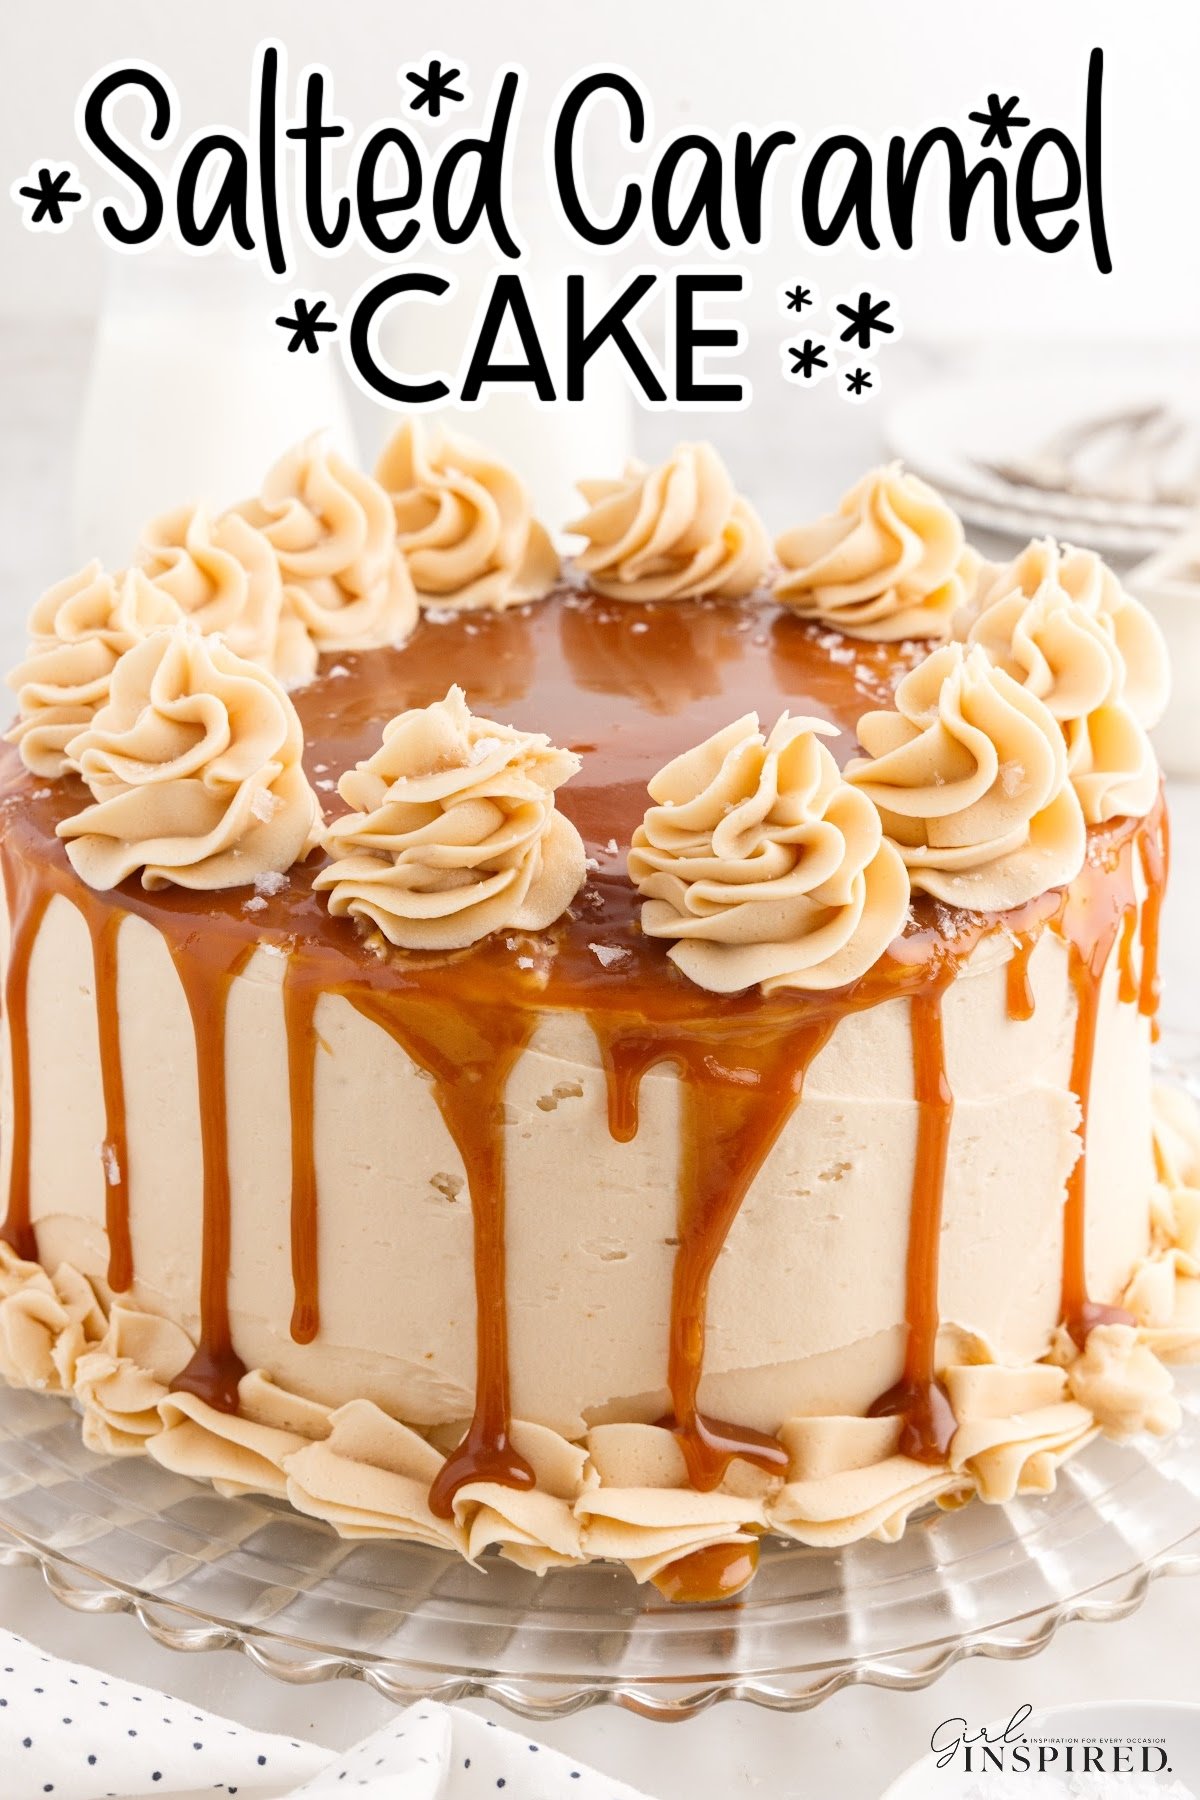 A whole Salted Caramel Cake with text overlay.